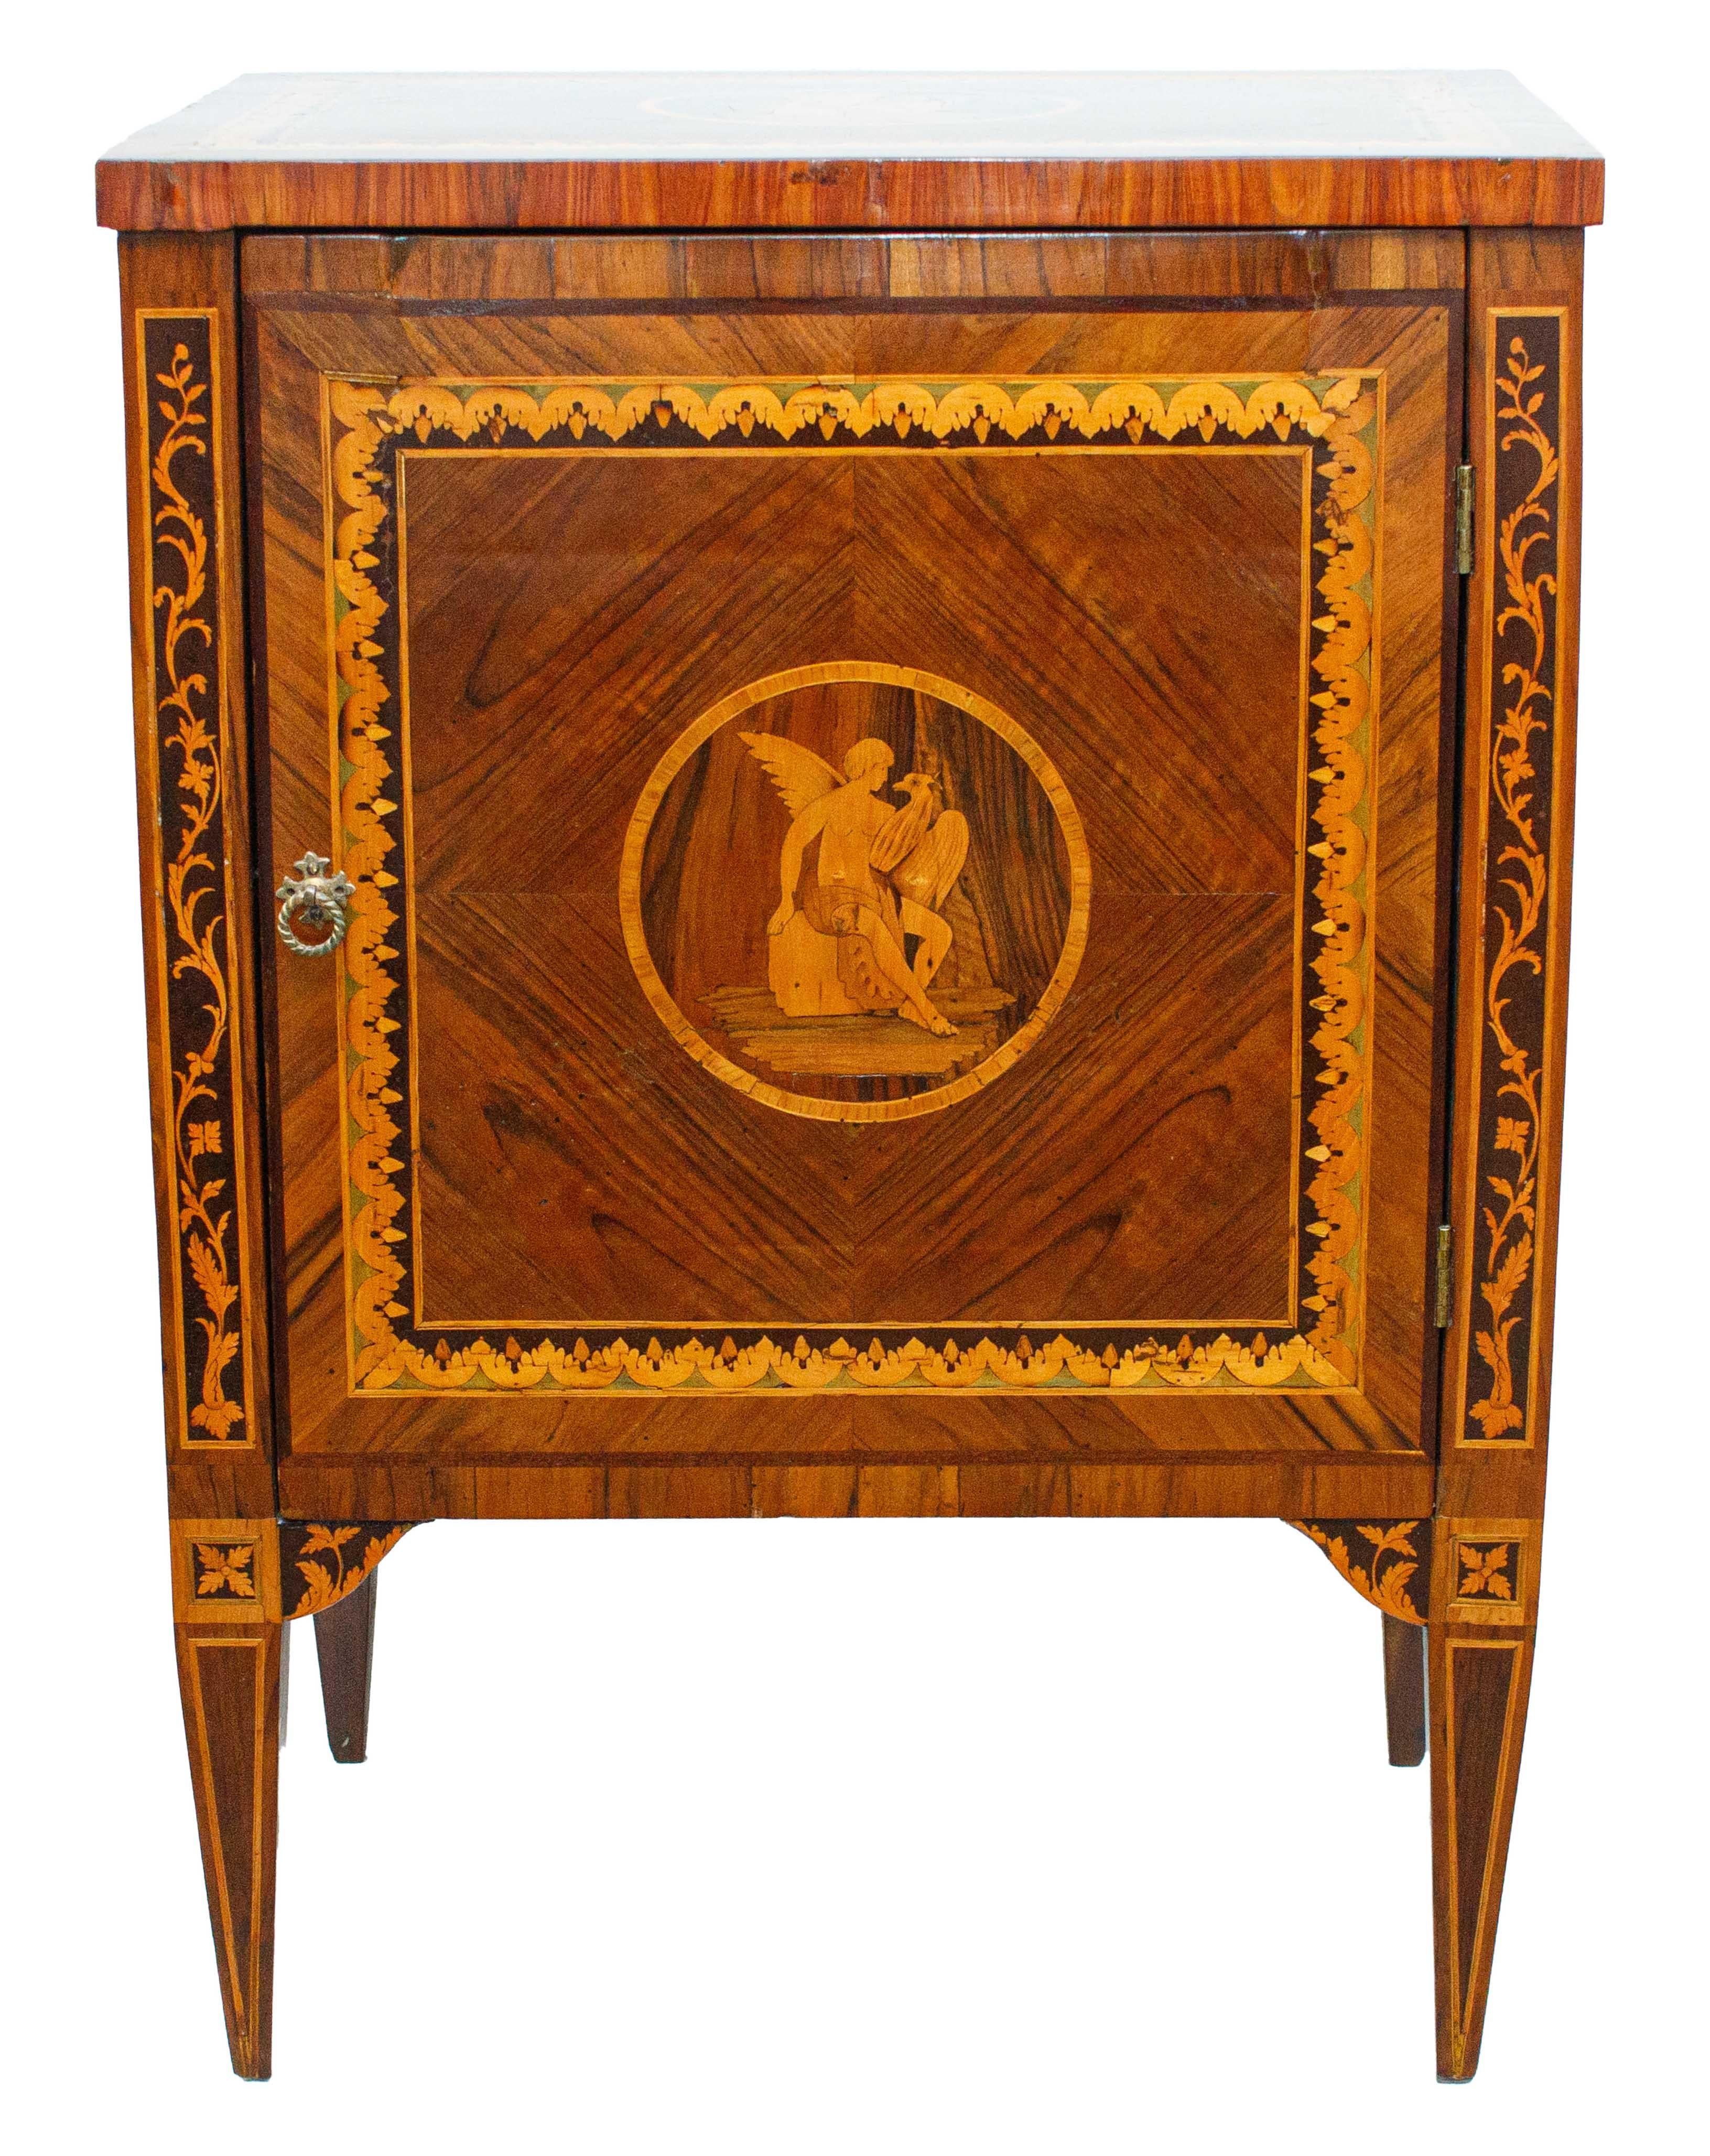 18th century, Louis XVI

Bedside table with Jupiter and eagle

Inlaid wood, 79 x 56 x 40 cm

The piece of furniture under consideration constitutes a splendid example of a Louis XVI-style one-door bedside table made of finely decorated inlaid wood,